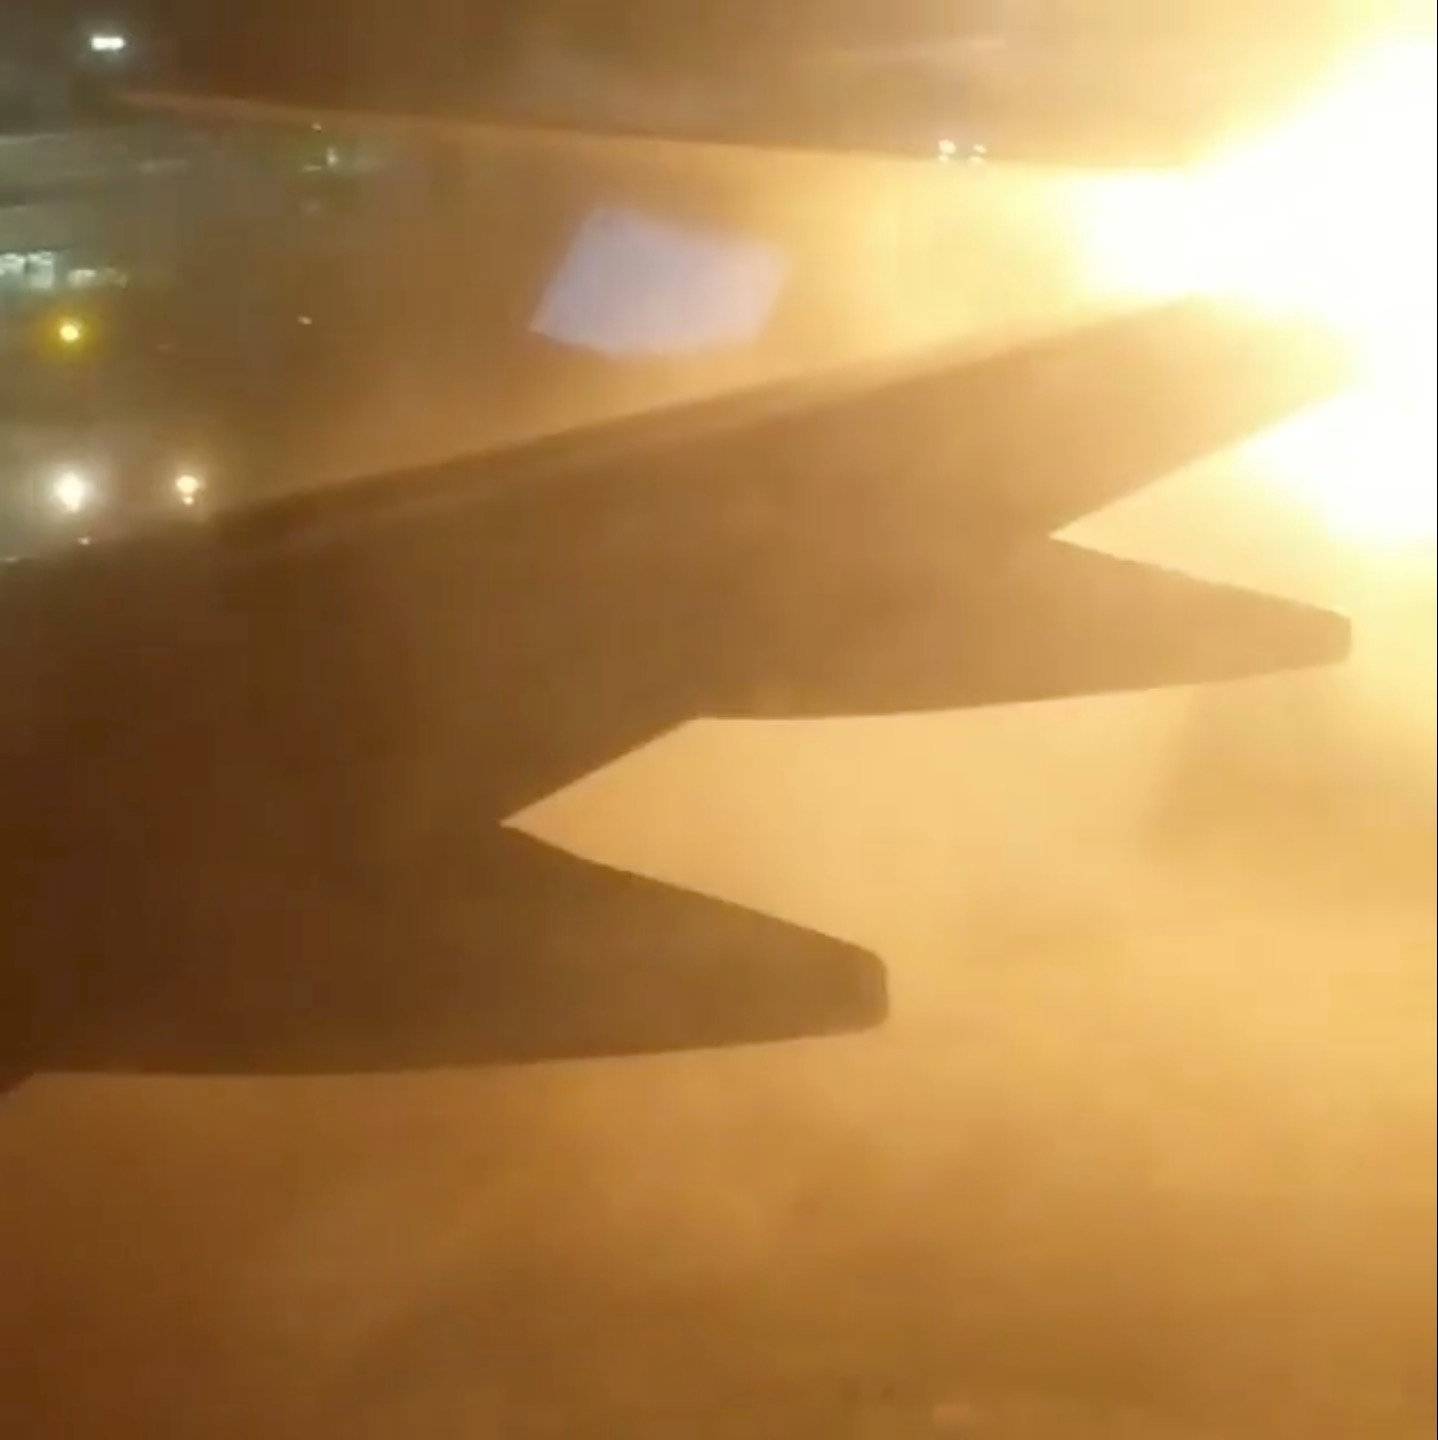 An explosion is seen through a window of a plane that has collided with another plane at Toronto's Pearson Airport, Canada